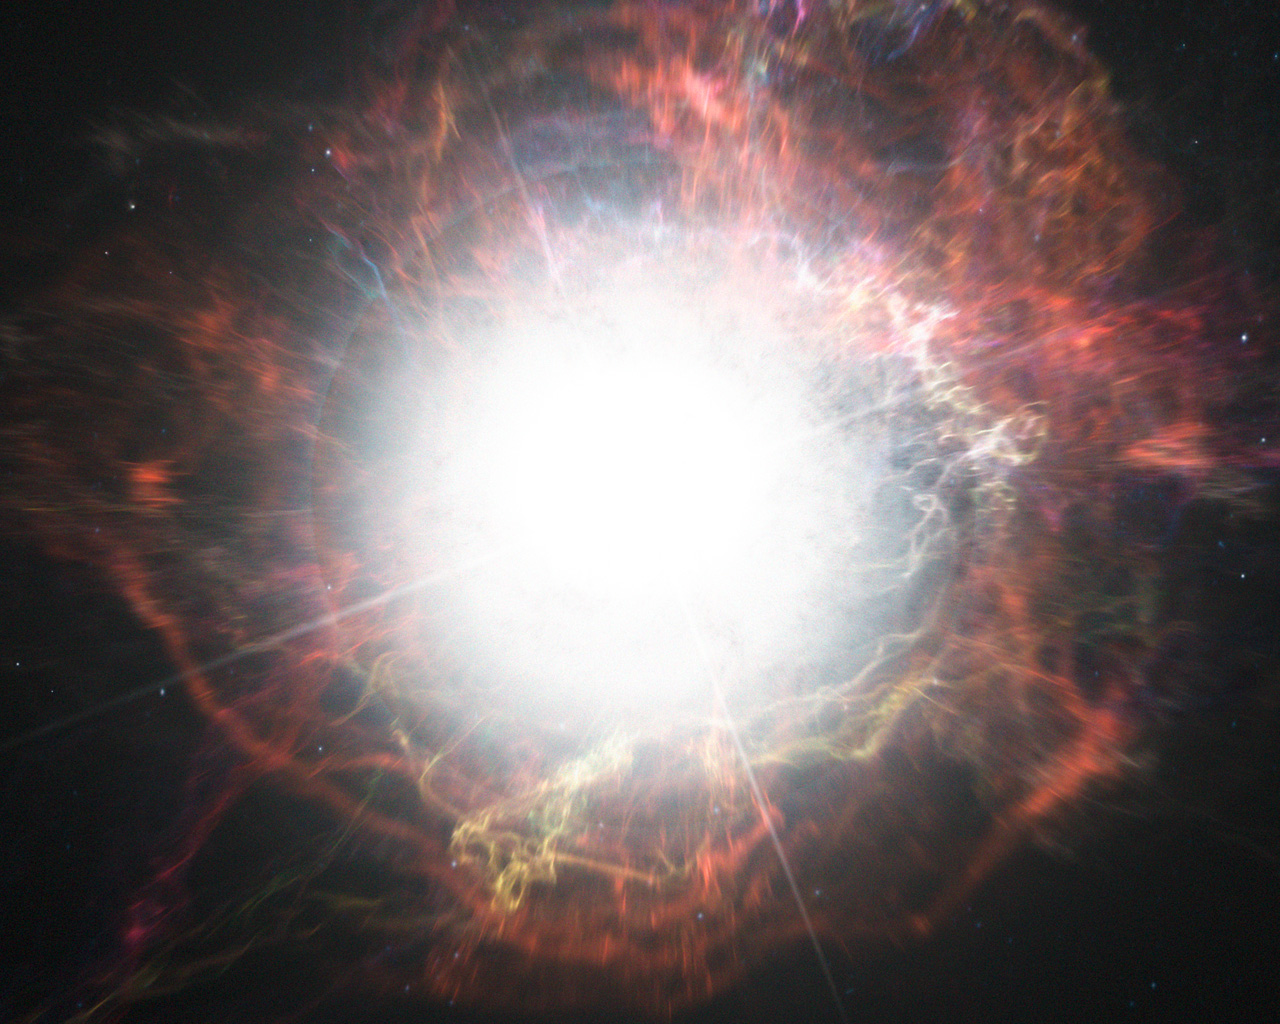 An artist's impression of a supernova explosion. With the help of NASA's Kepler space telescope, astronomers were able to observe for the first time the exact moment when the shockwave from a supernova reaches the surface of the progenitor star just before the latter explodes. Image Credit: ESO/M. Kornmesser